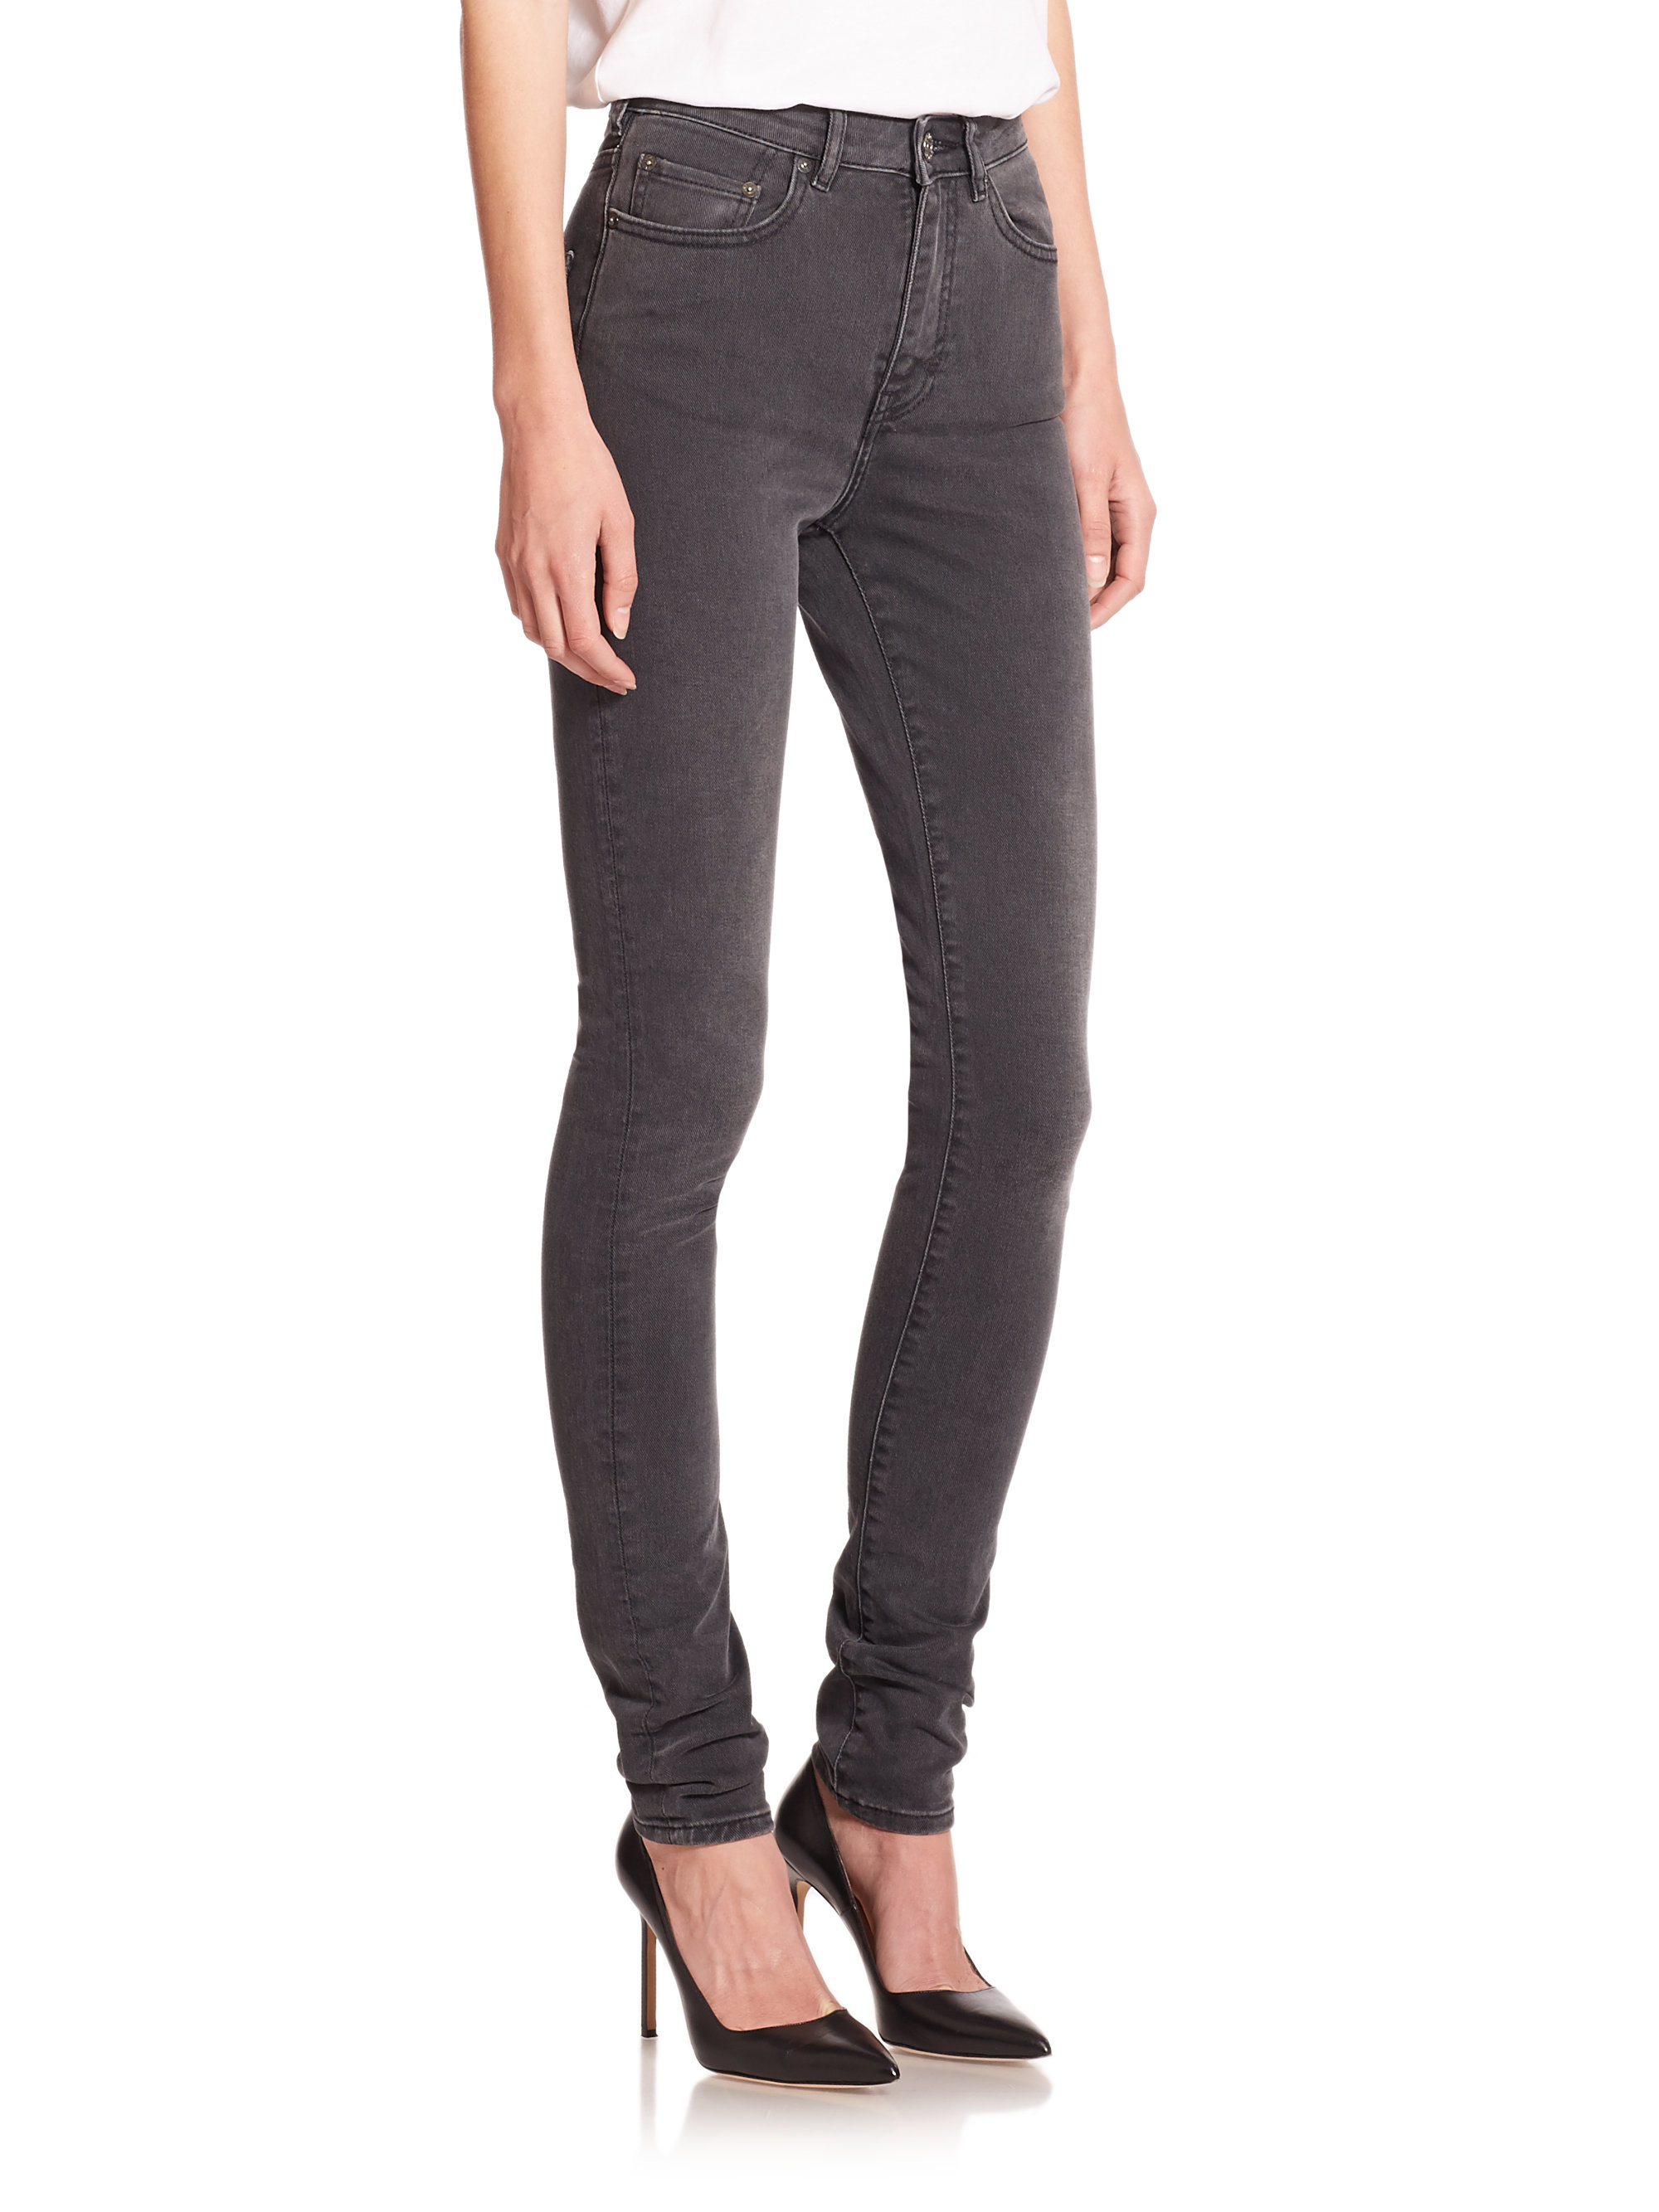 Acne Studios Pin High-rise Skinny Jeans in Gray - Lyst